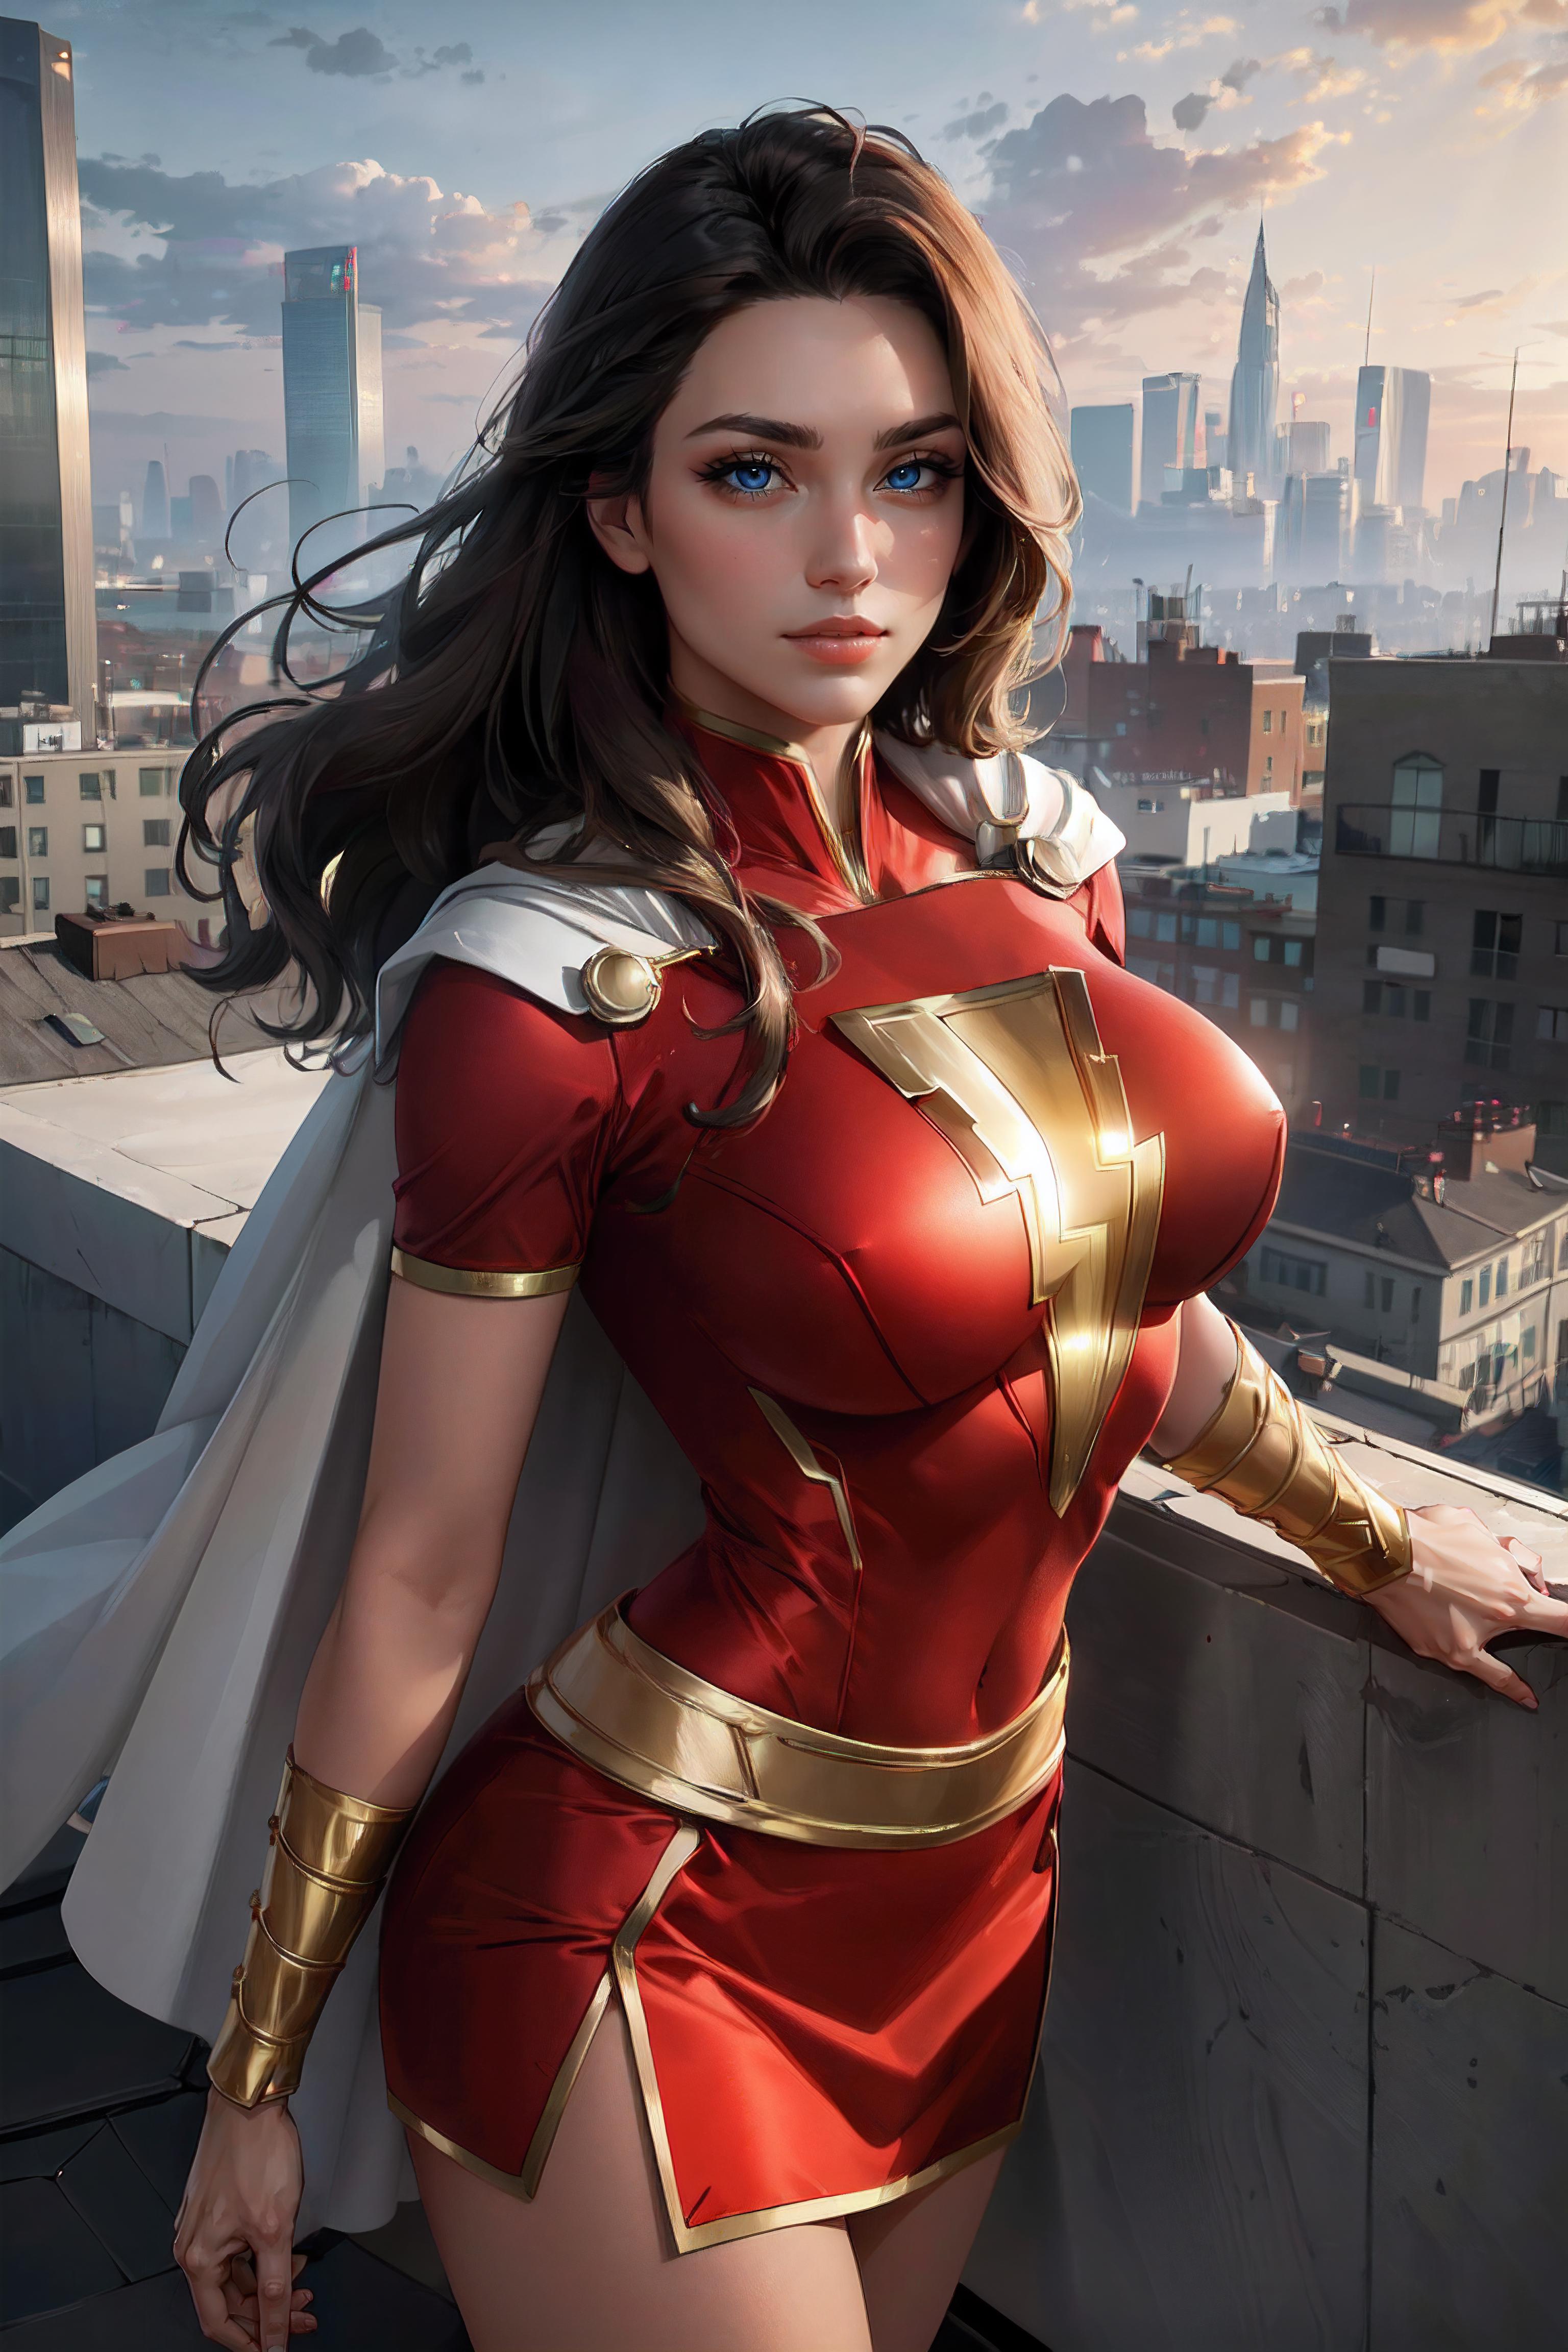 Mary Marvel (DC Comics) LoRA image by betweenspectrums